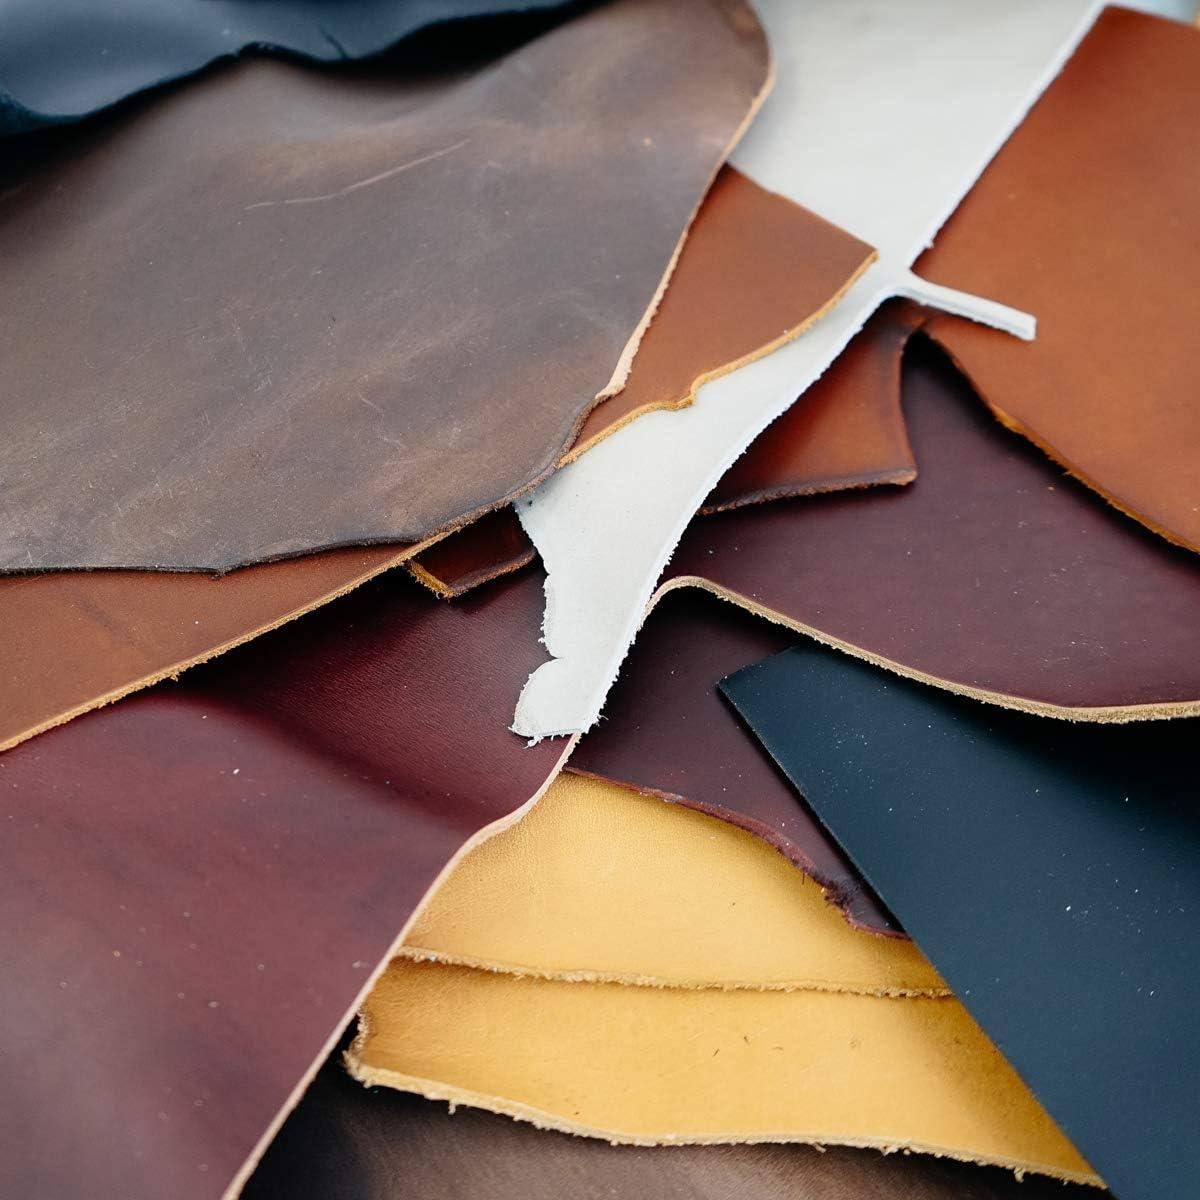 2-Lb Assorted Leather Scraps. Great for Crafts